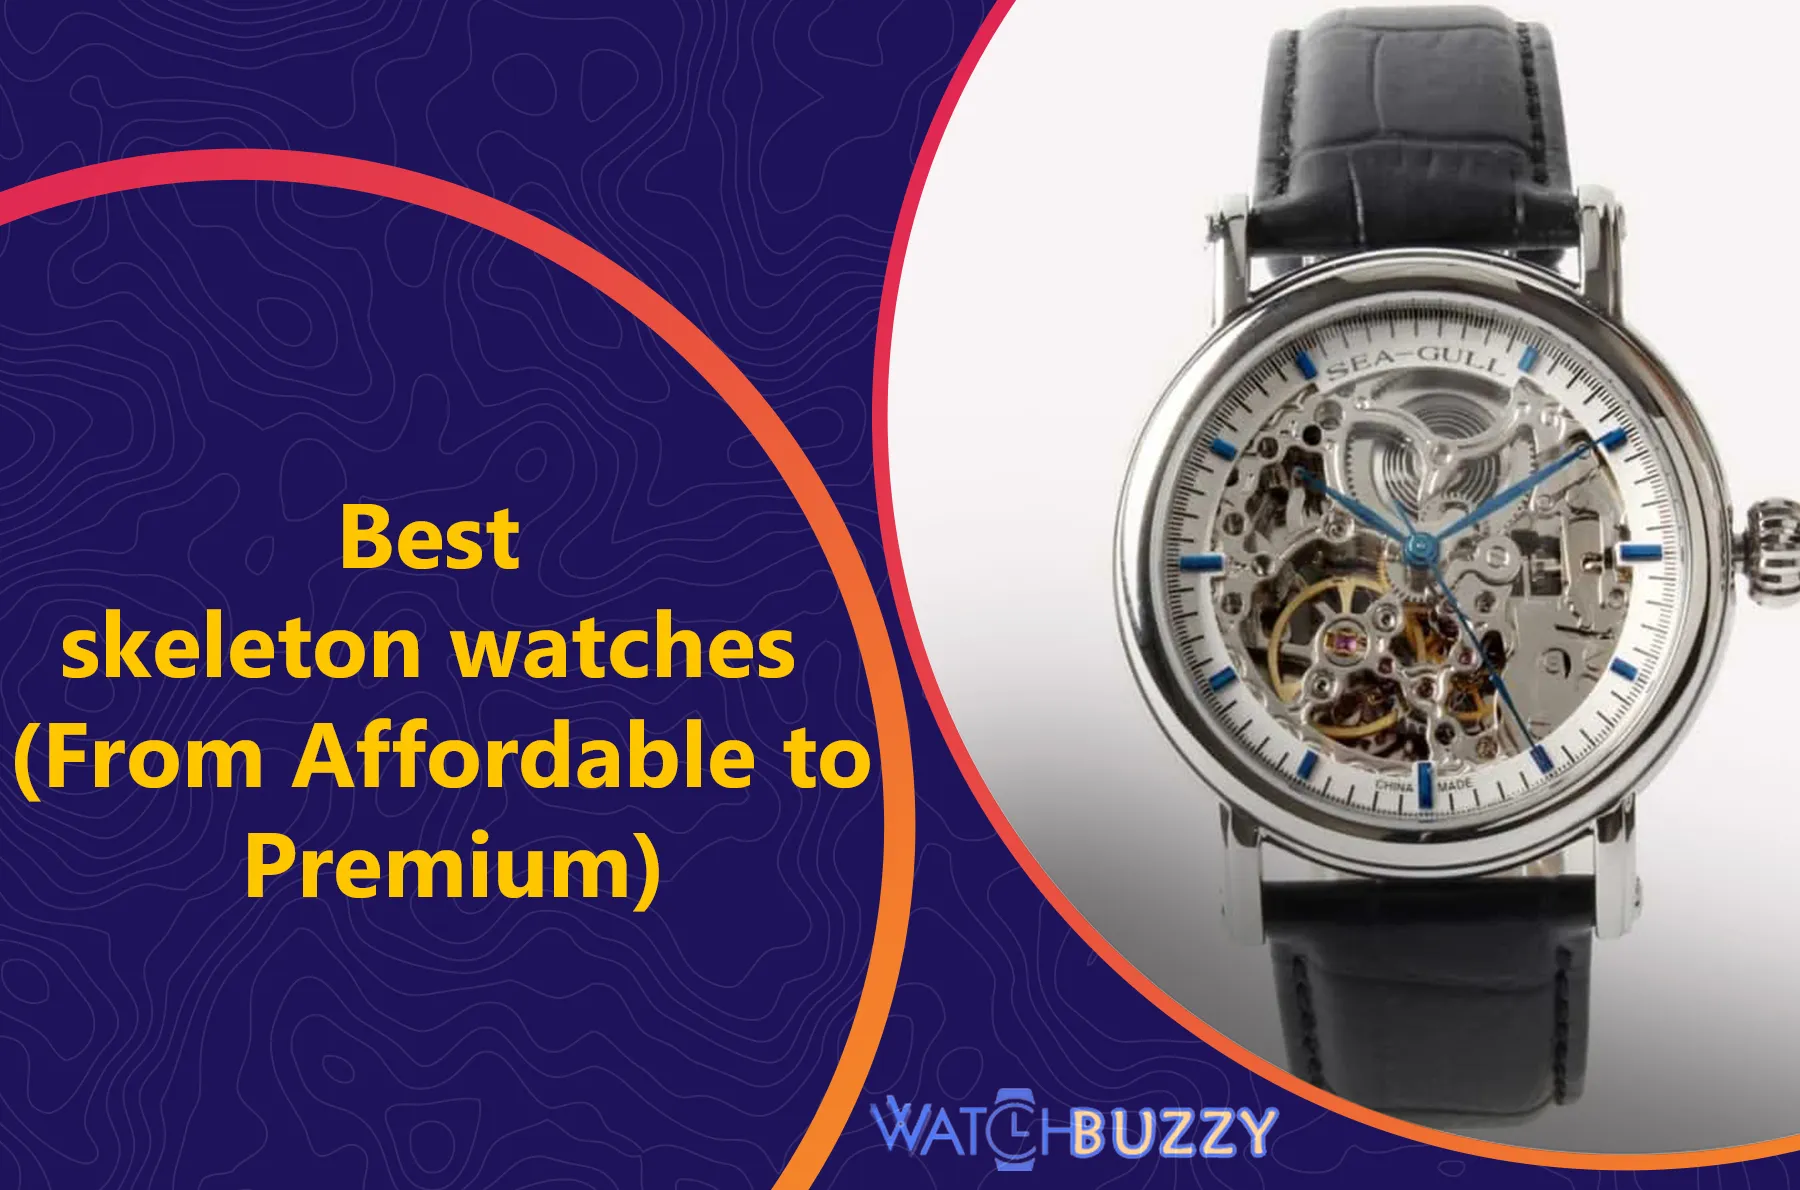 Best skeleton watches (From Affordable to Premium)